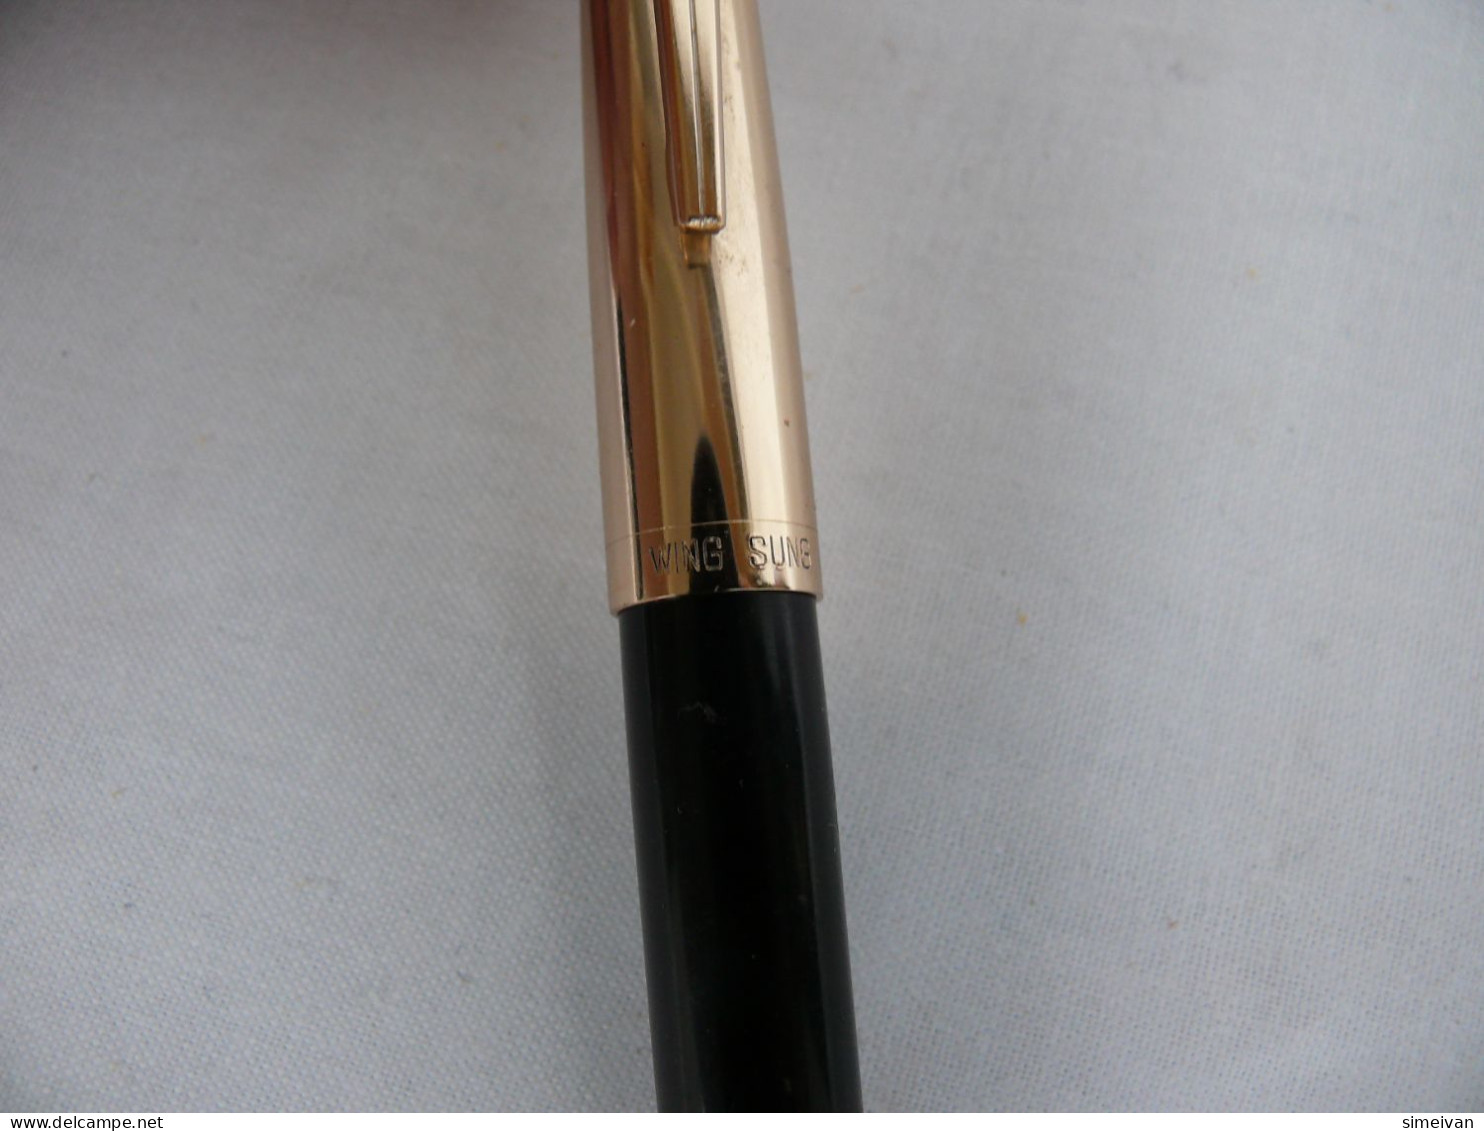 Vintage Wing Sung Fountain Pen Black Body Gold Cap Made In China #2026 - Schreibgerät